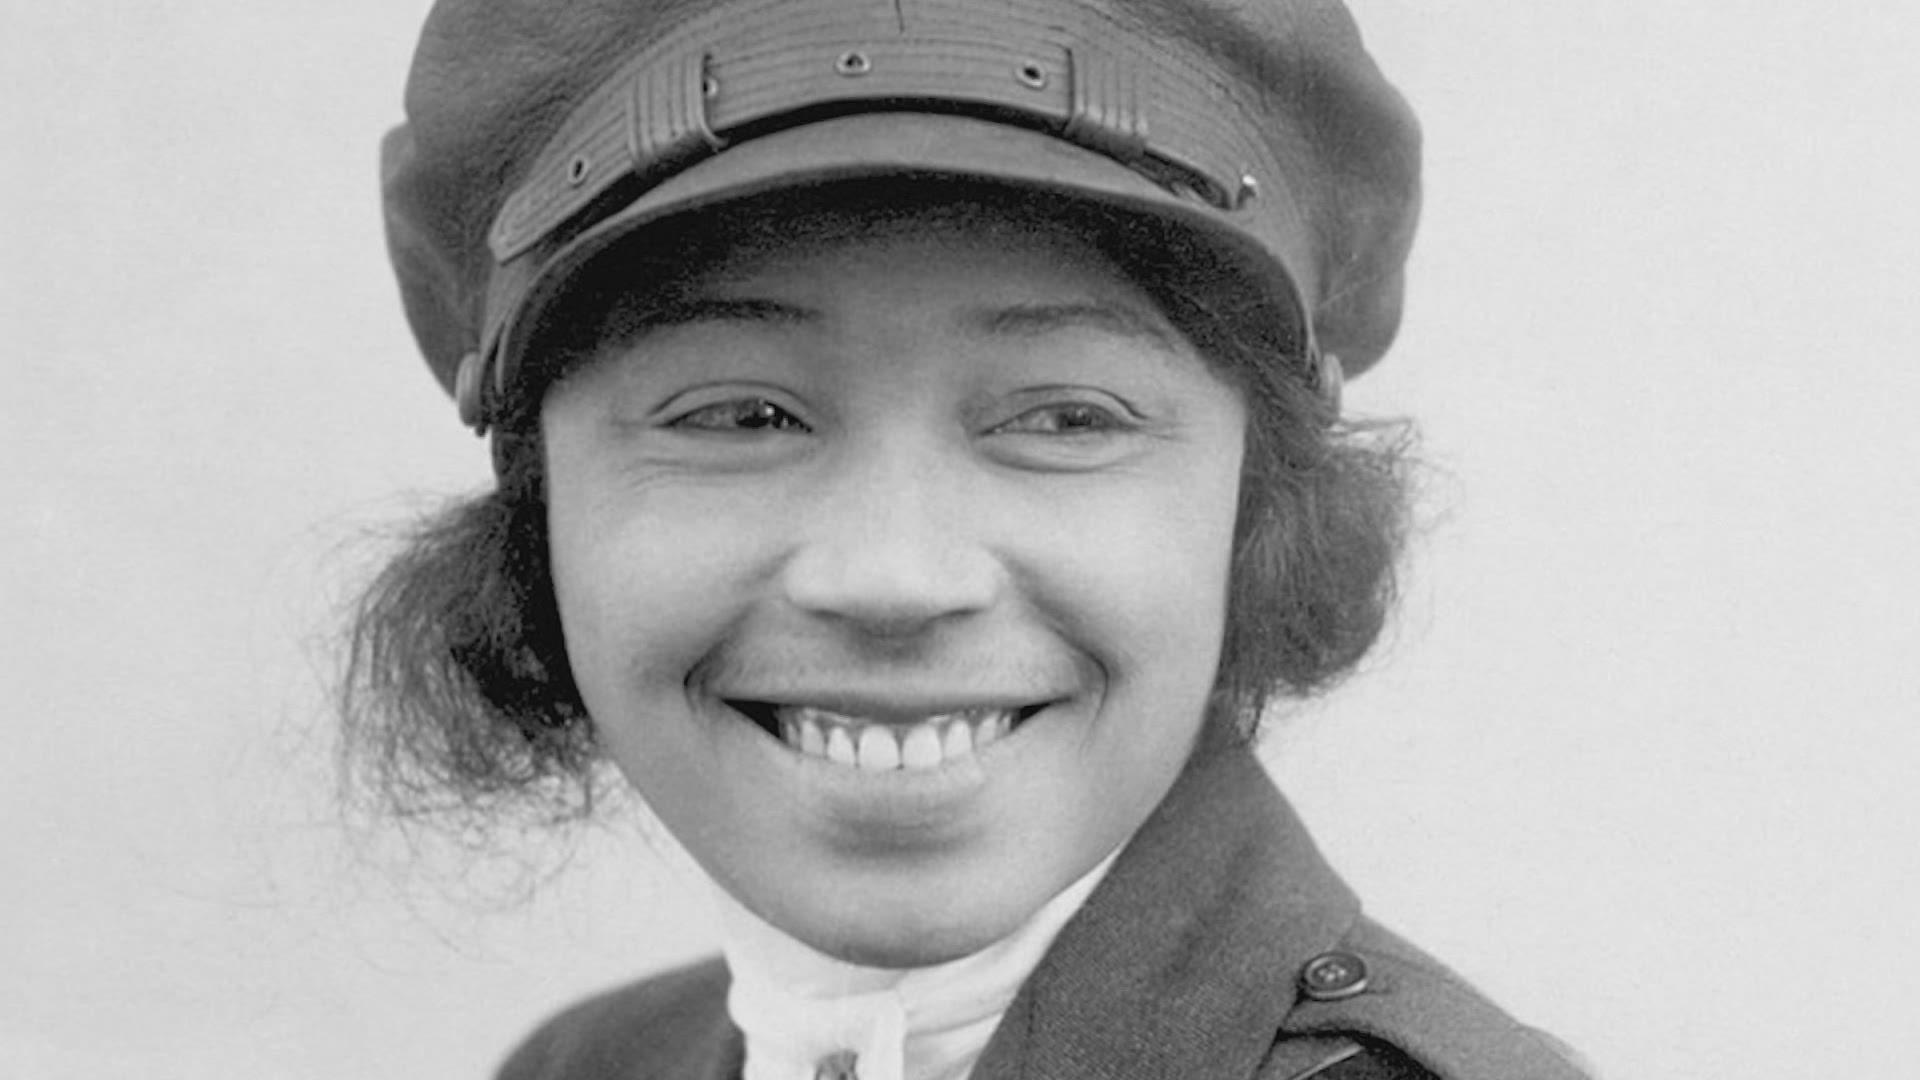 Bessie Coleman became the first Black woman to hold a pilot license. Even though she died at an early age, the important impact she left behind is unquestioned.